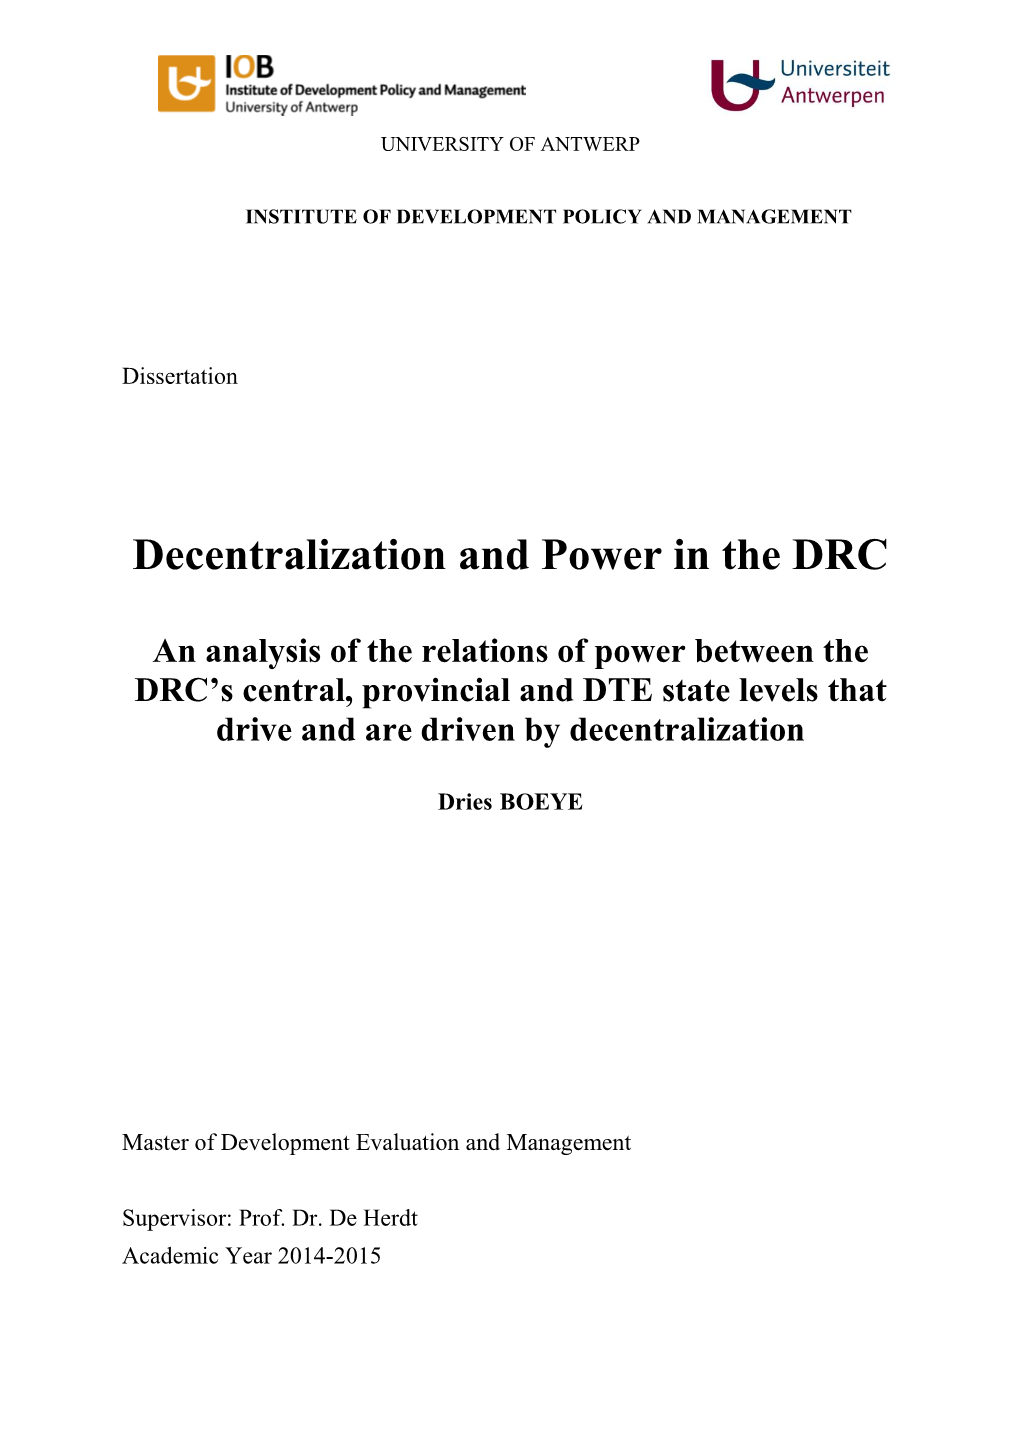 Decentralization and Power in the DRC